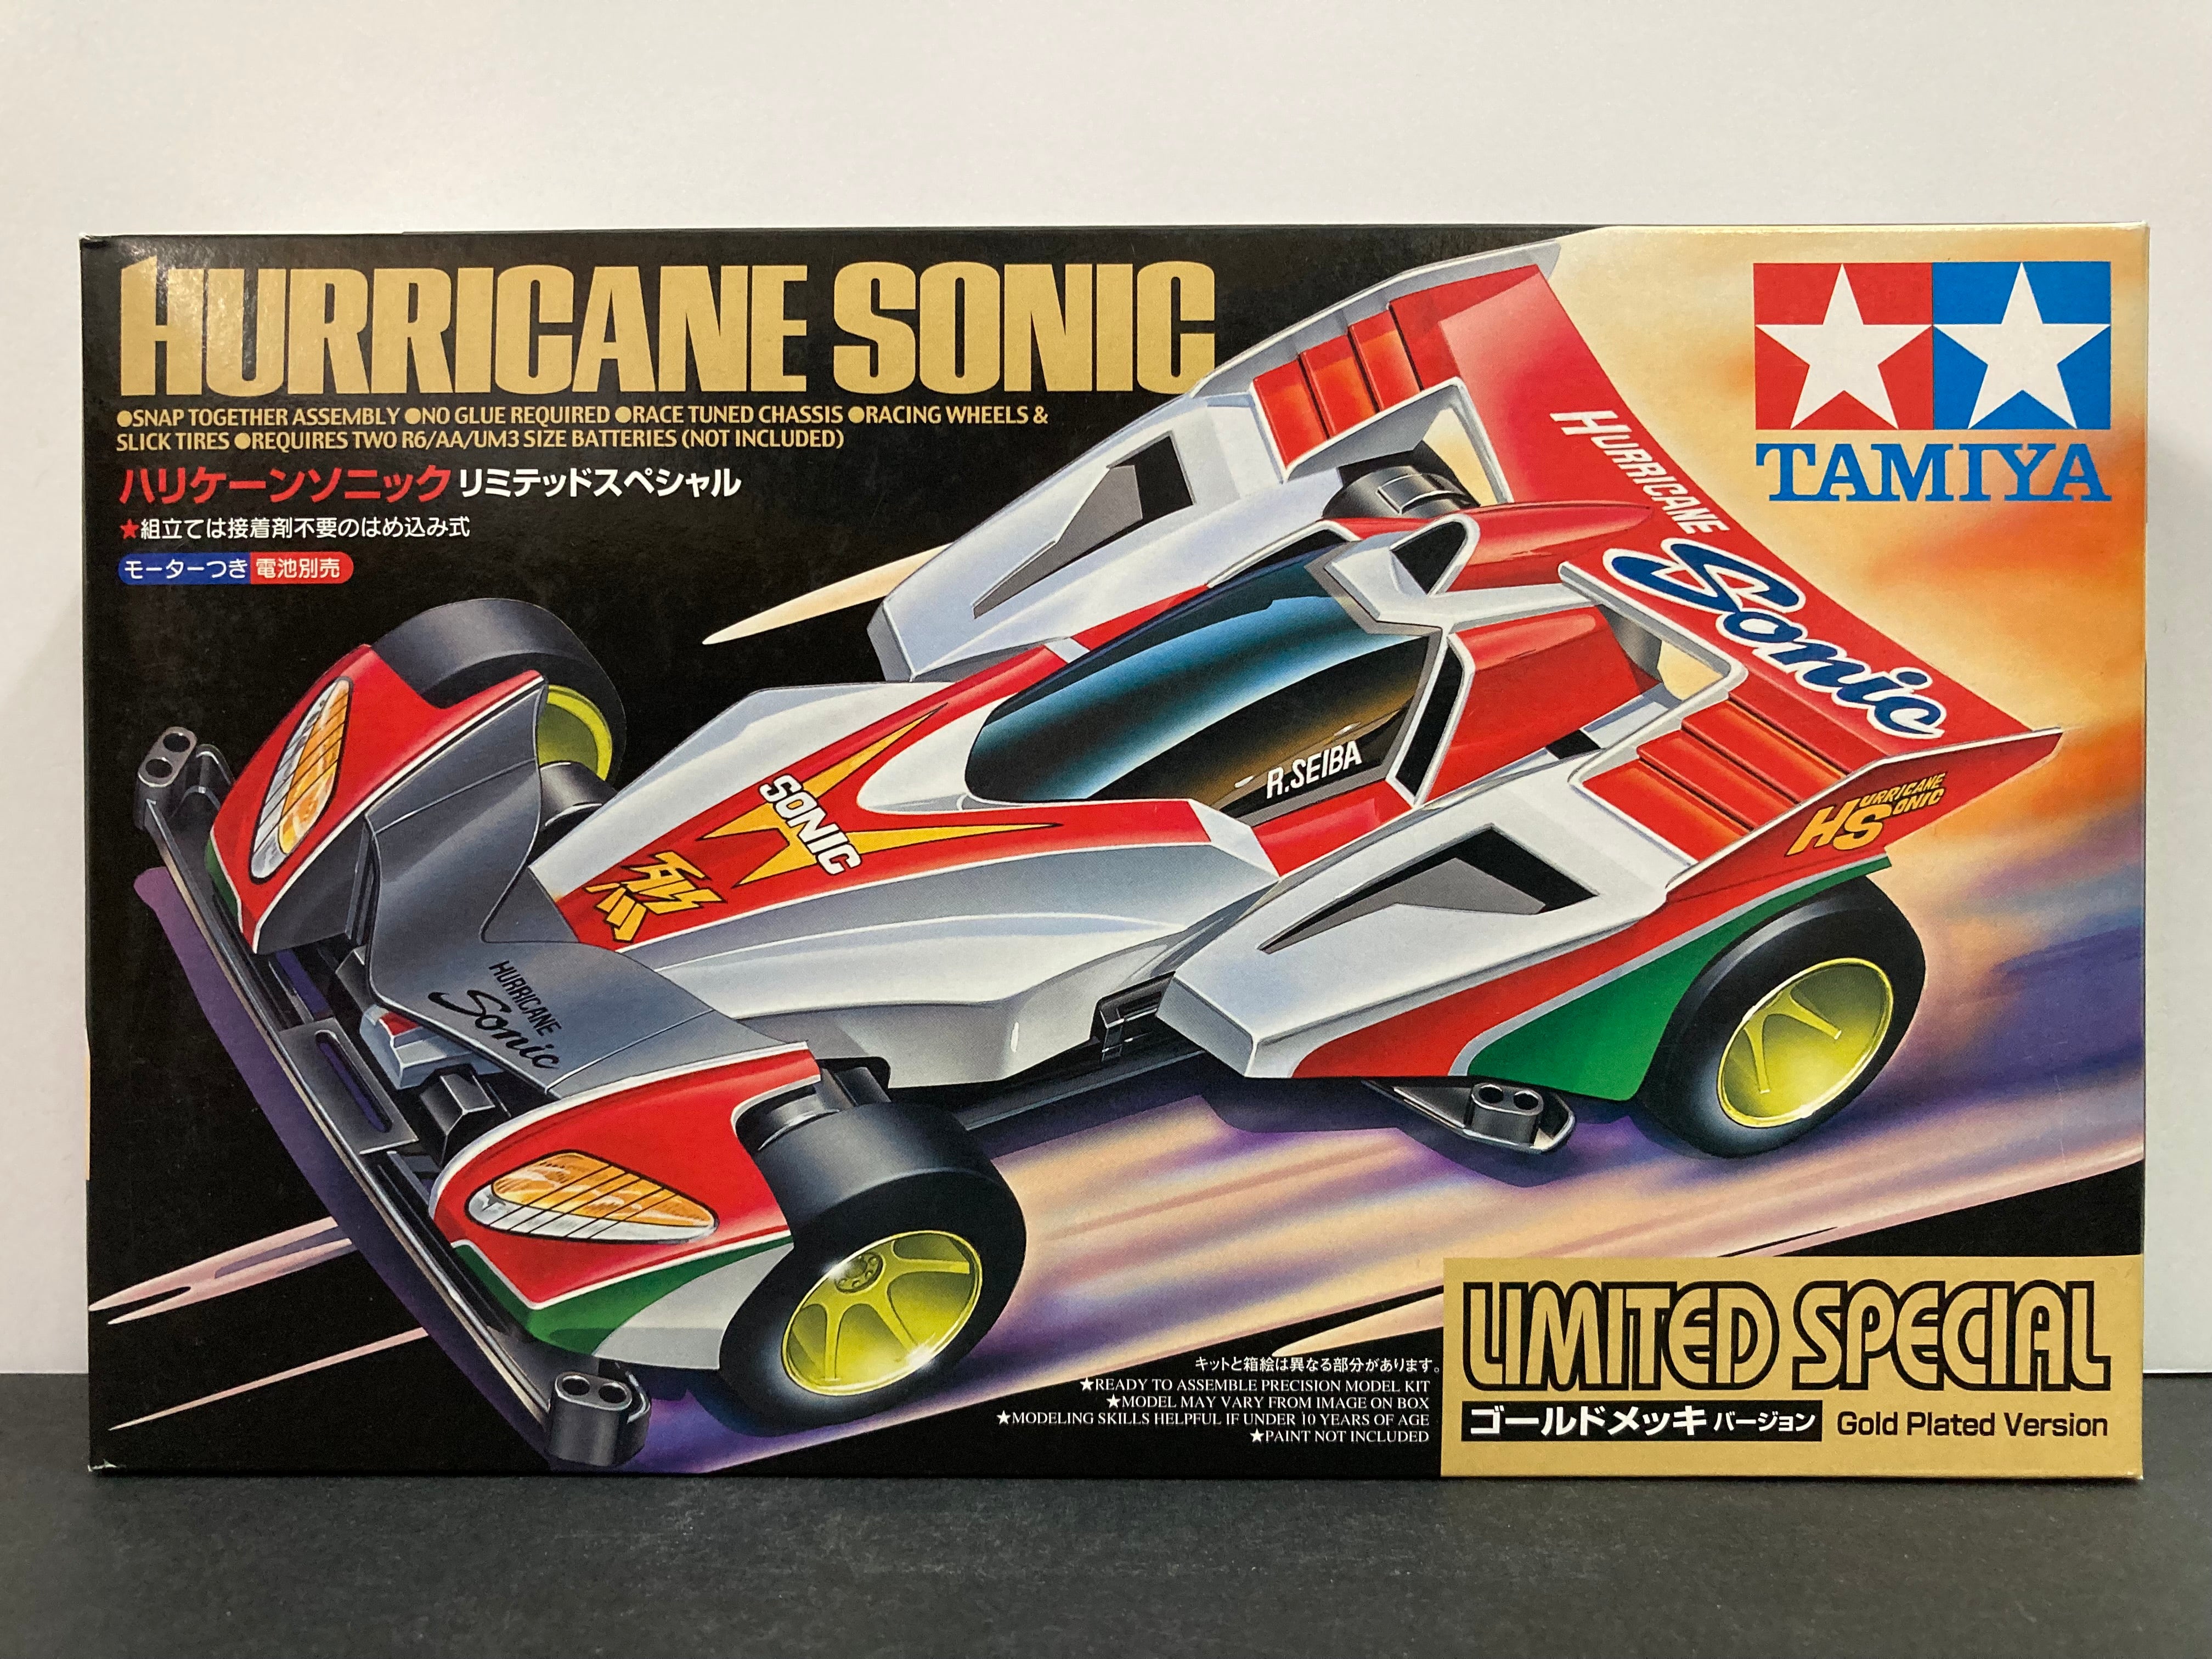 94487] Hurricane Sonic Limited Special Version ~ Gold Plated Version